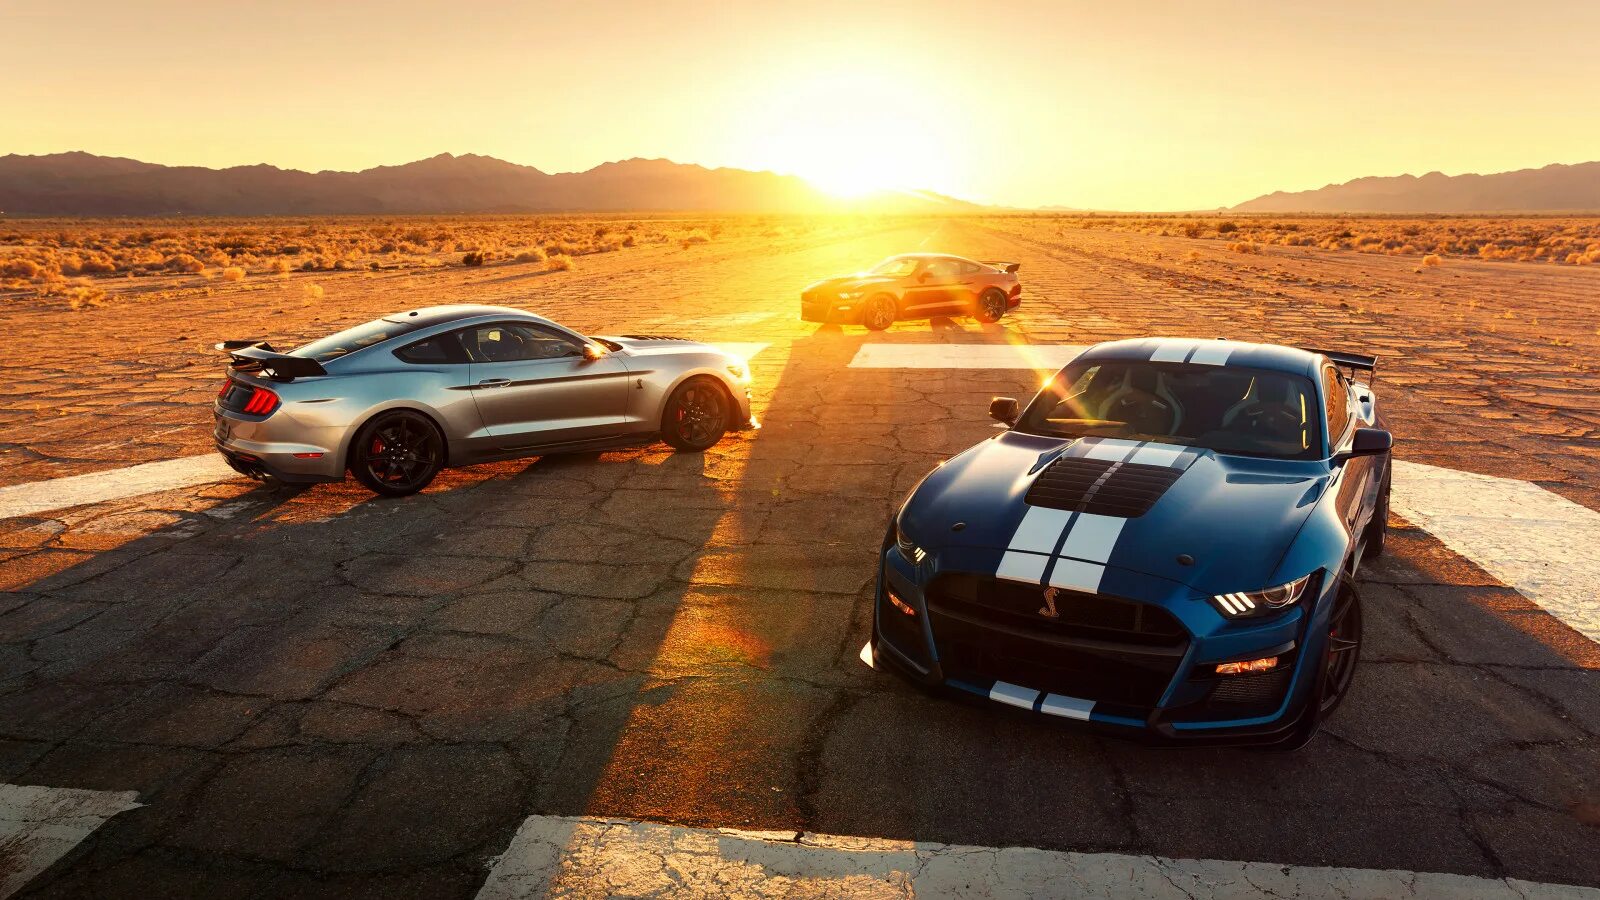 Фото машины 4. Форд Мустанг 4. Ford Mustang gt500 4к. Ford Shelby gt500 2020. Ford Mustang 4 Shelby.